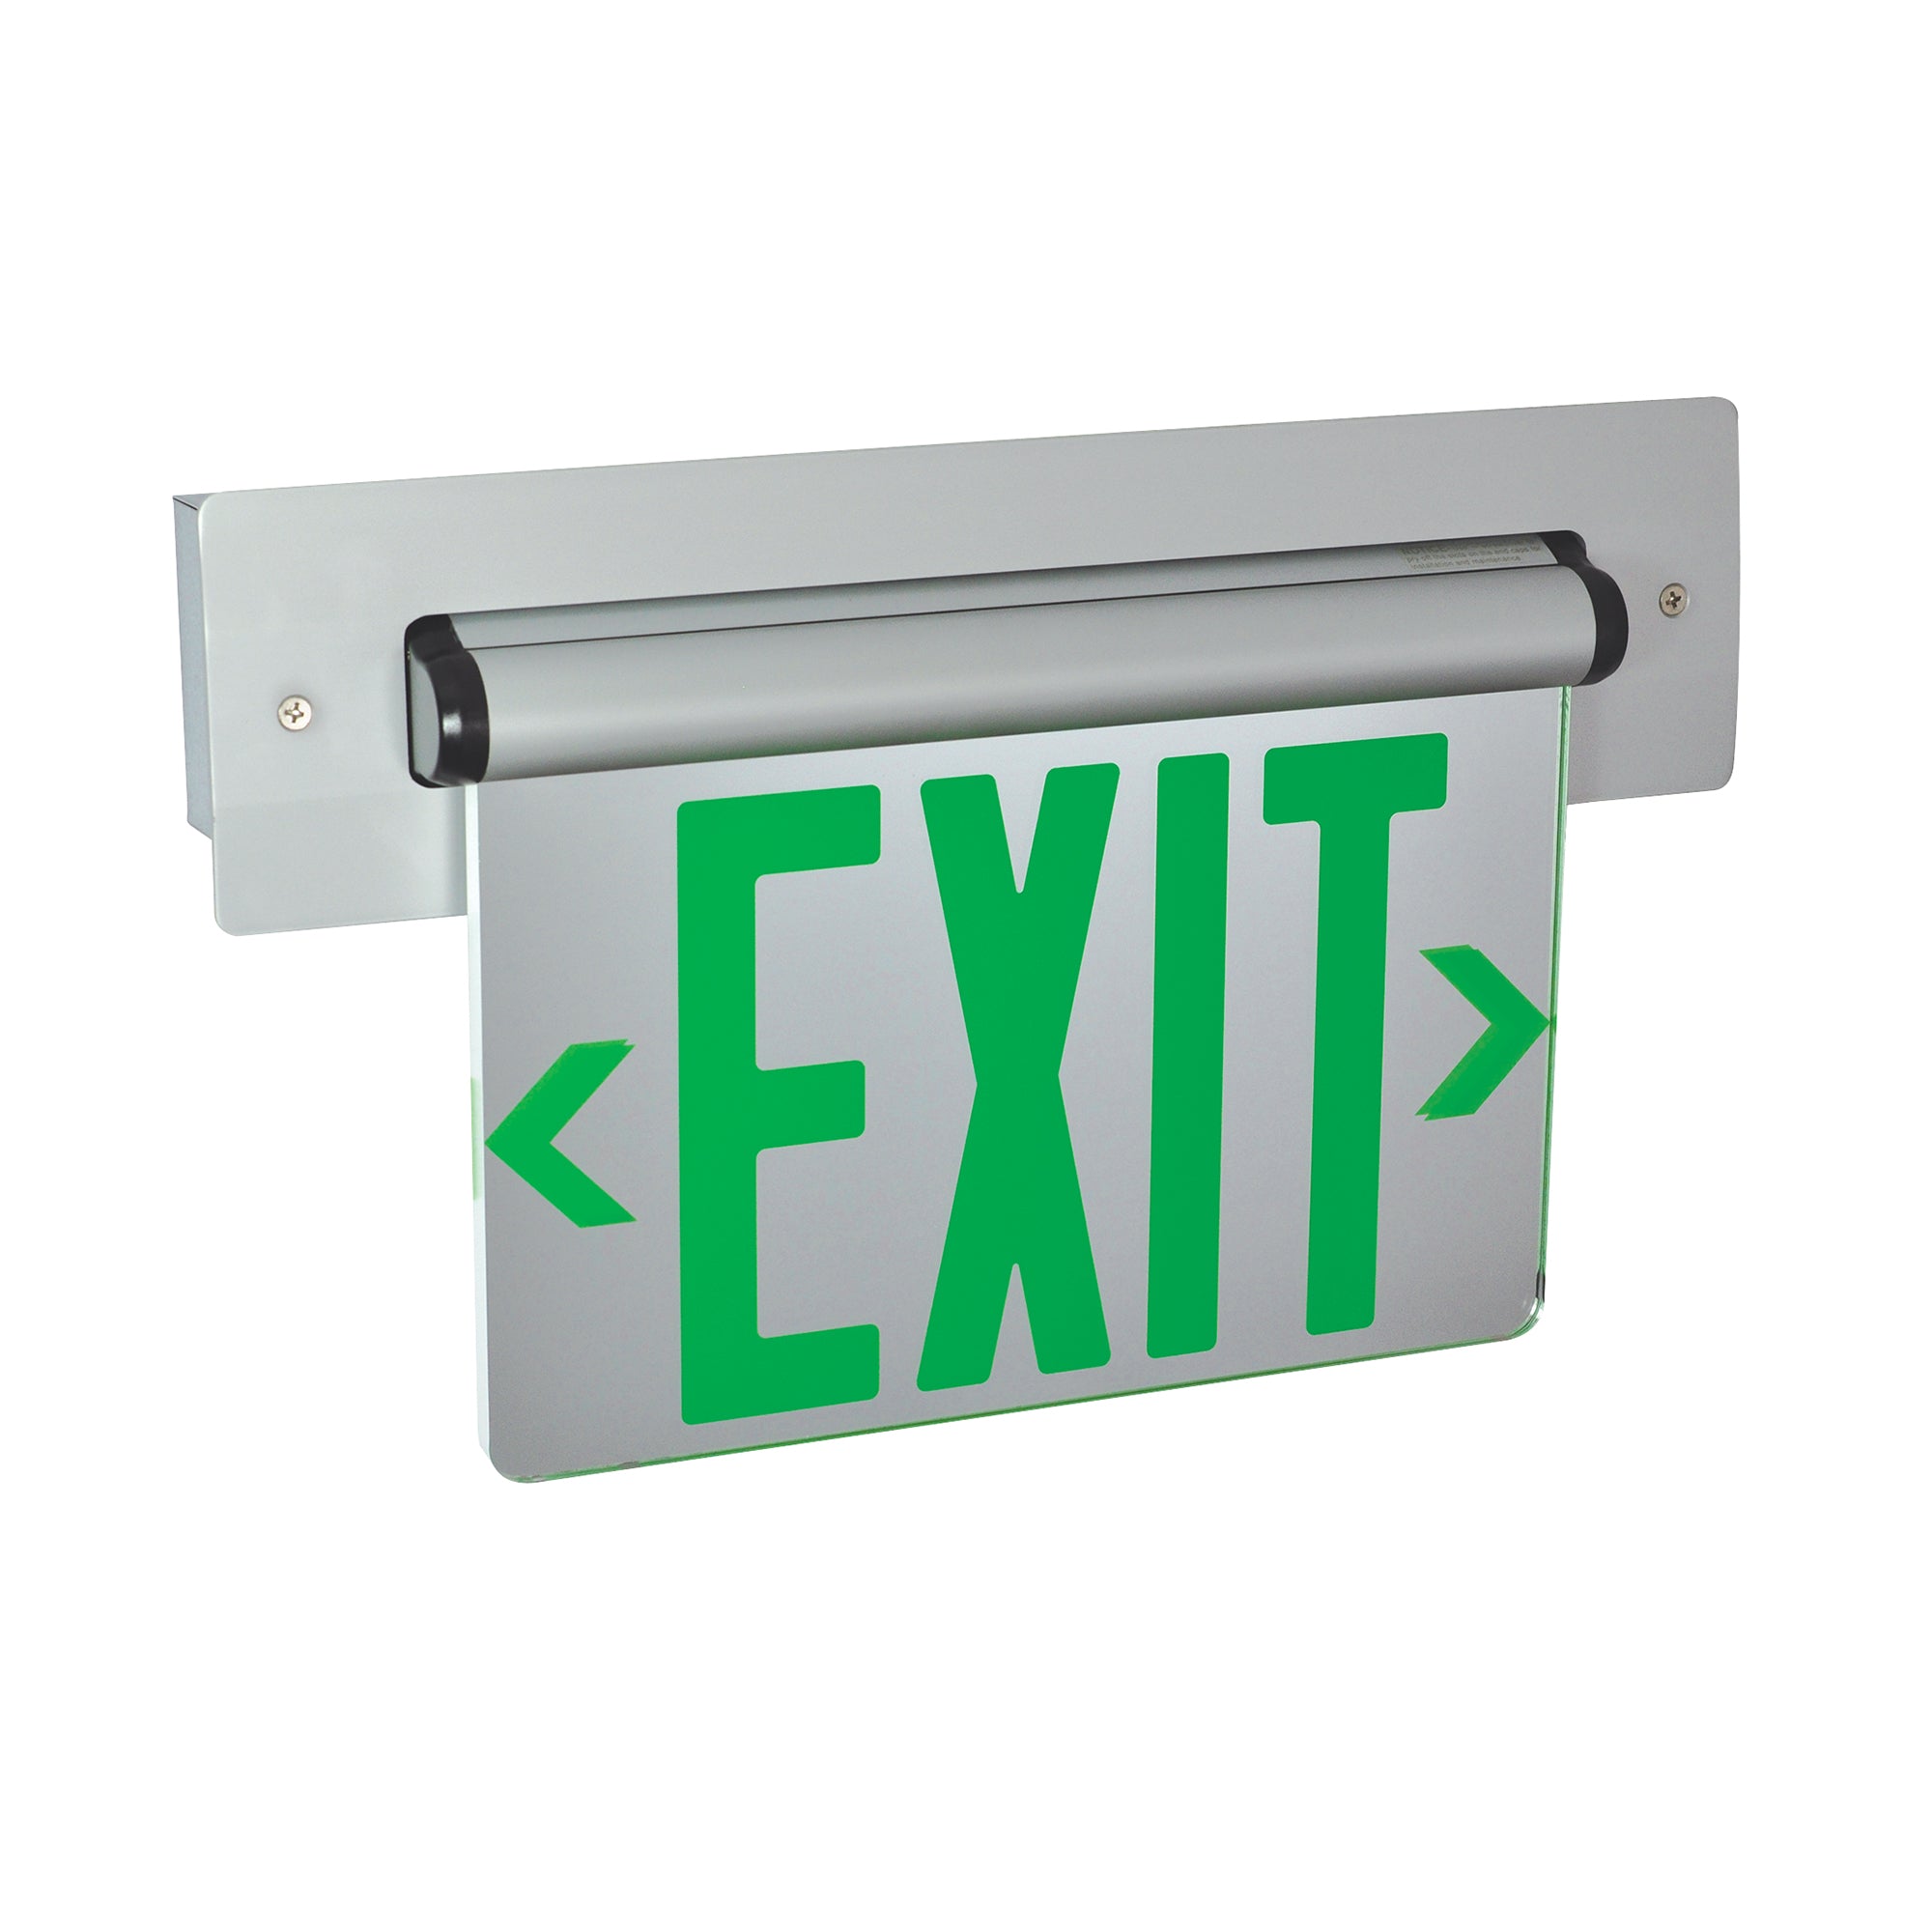 Nora Lighting NX-814-LEDG2MW - Exit / Emergency - Recessed Adjustable LED Edge-Lit Exit Sign, 2 Circuit, 6 Inch Green Letters, Double Face / Mirrored Acrylic, White Housing